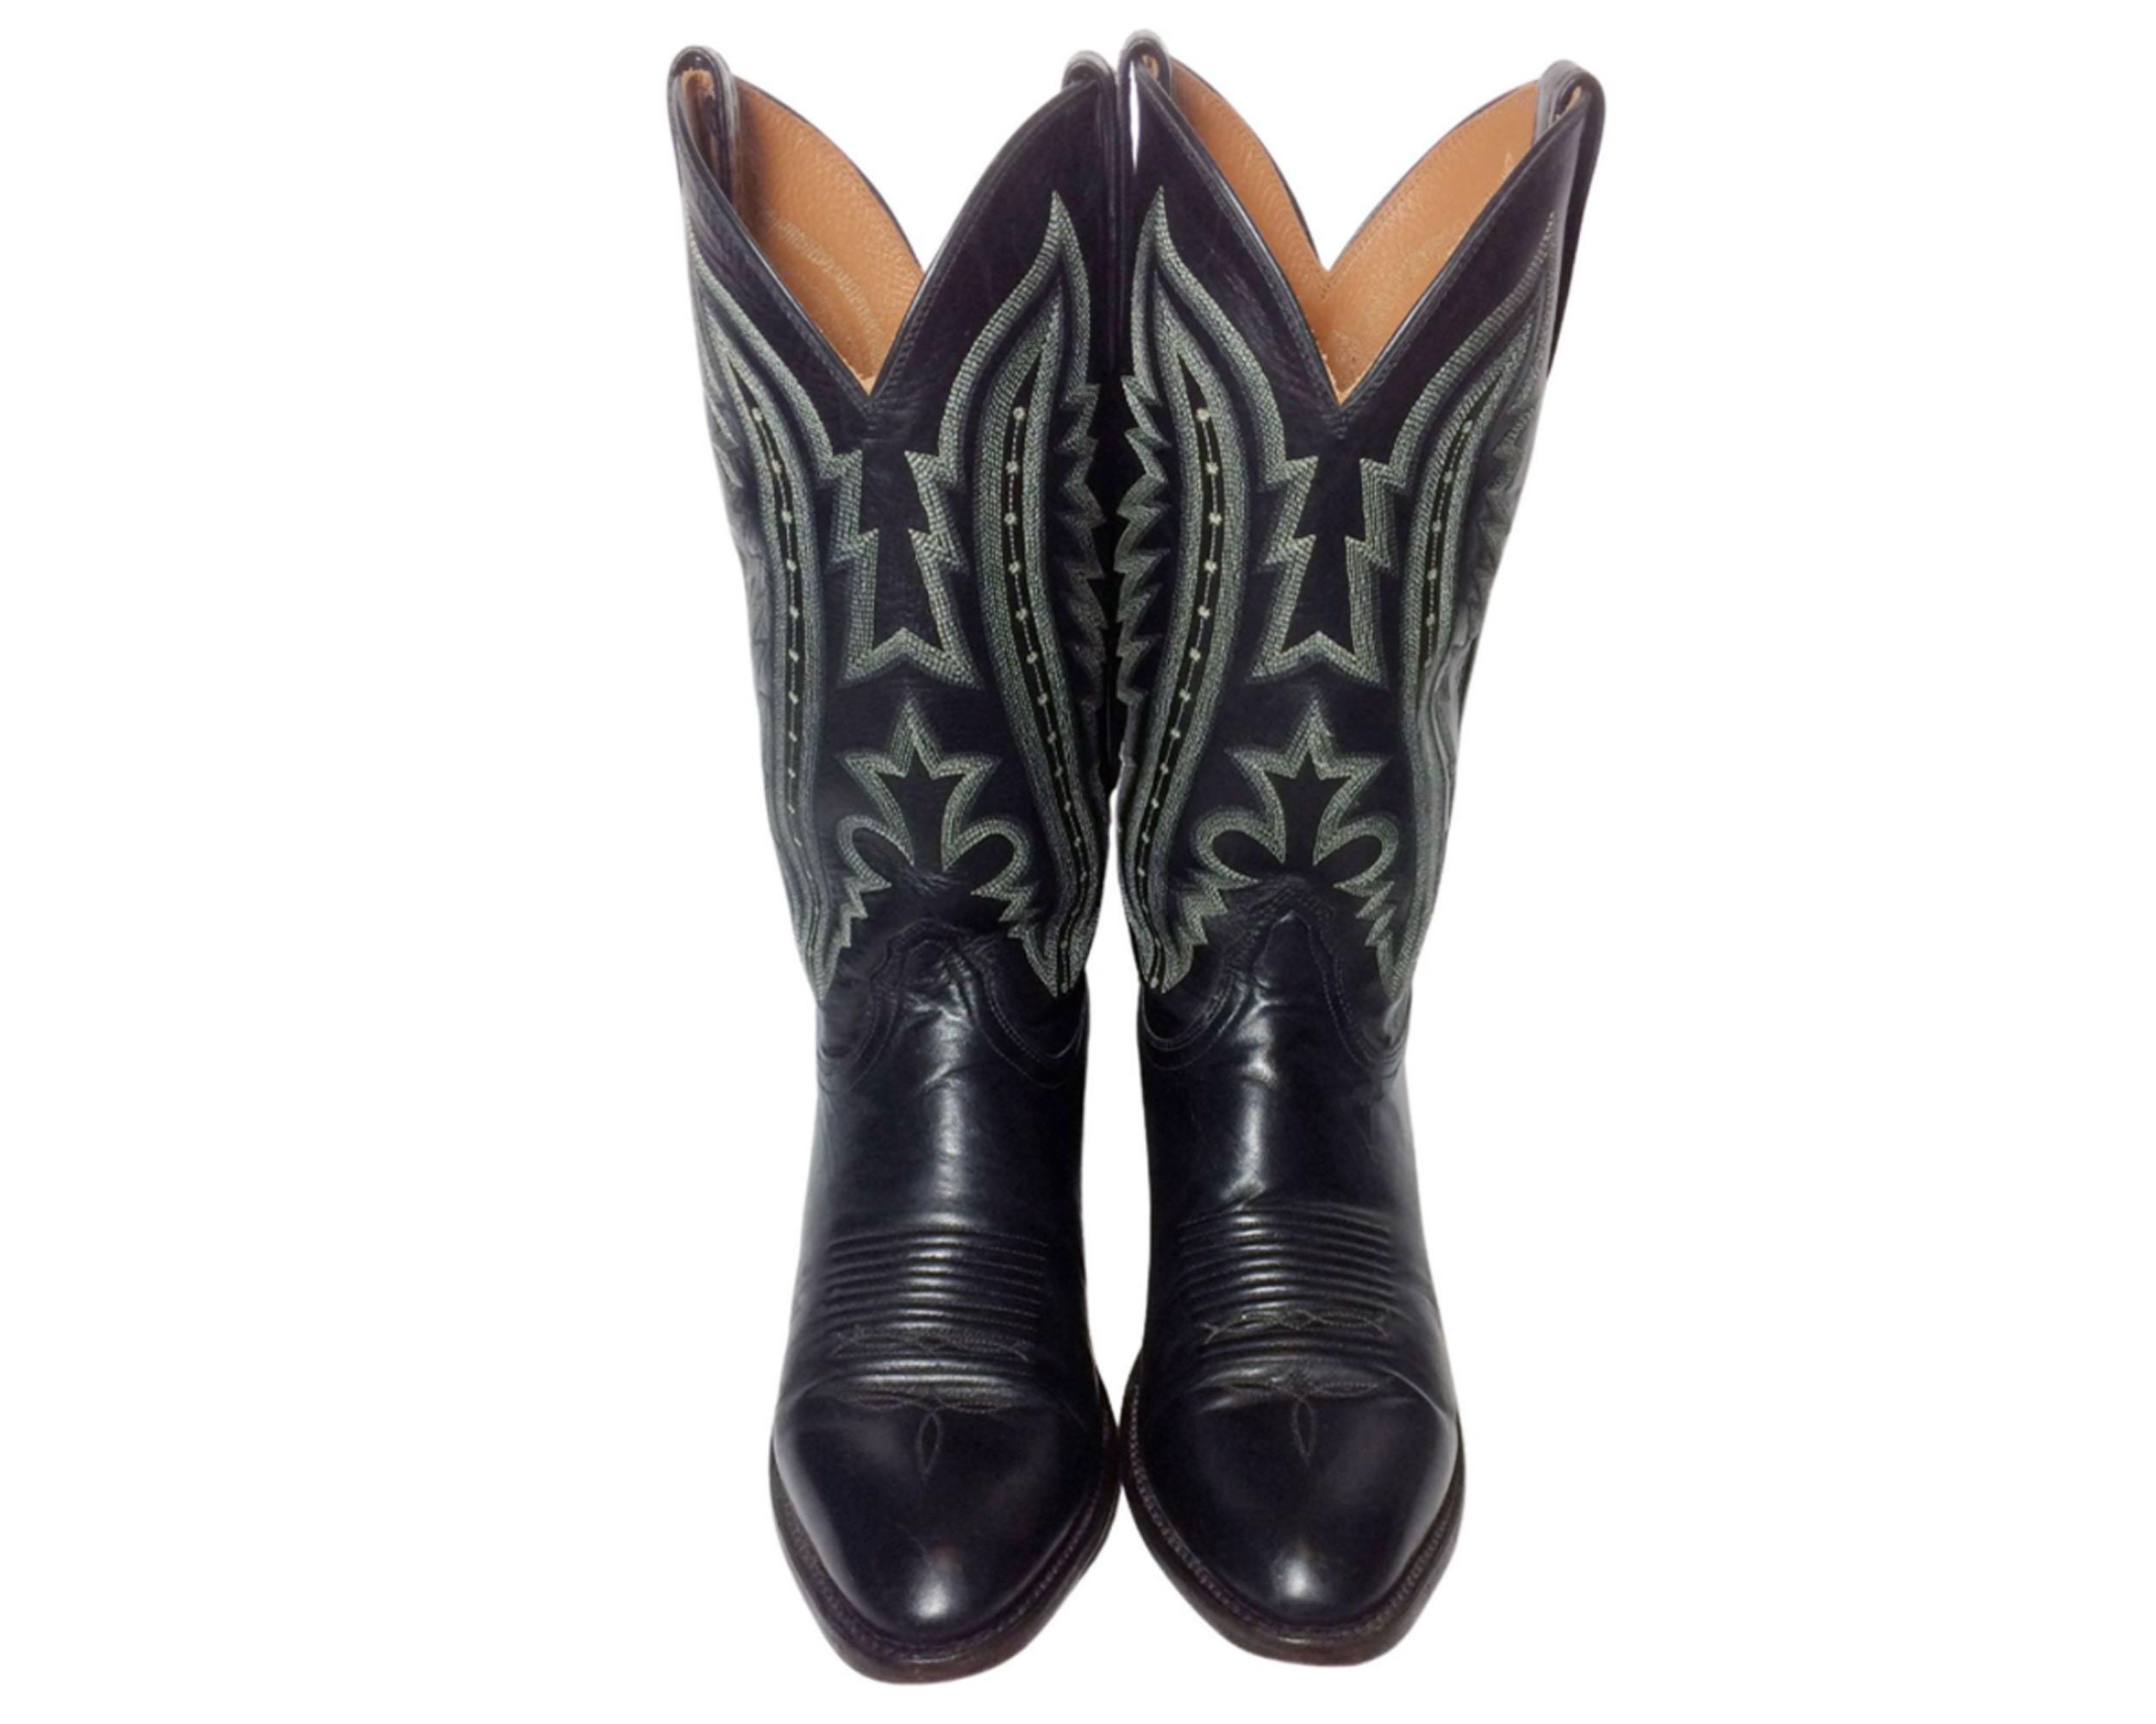 LUCCHESE 2000 BLACK LEATHER Cowboy Boots Men's Size 9 E.E. Country ...